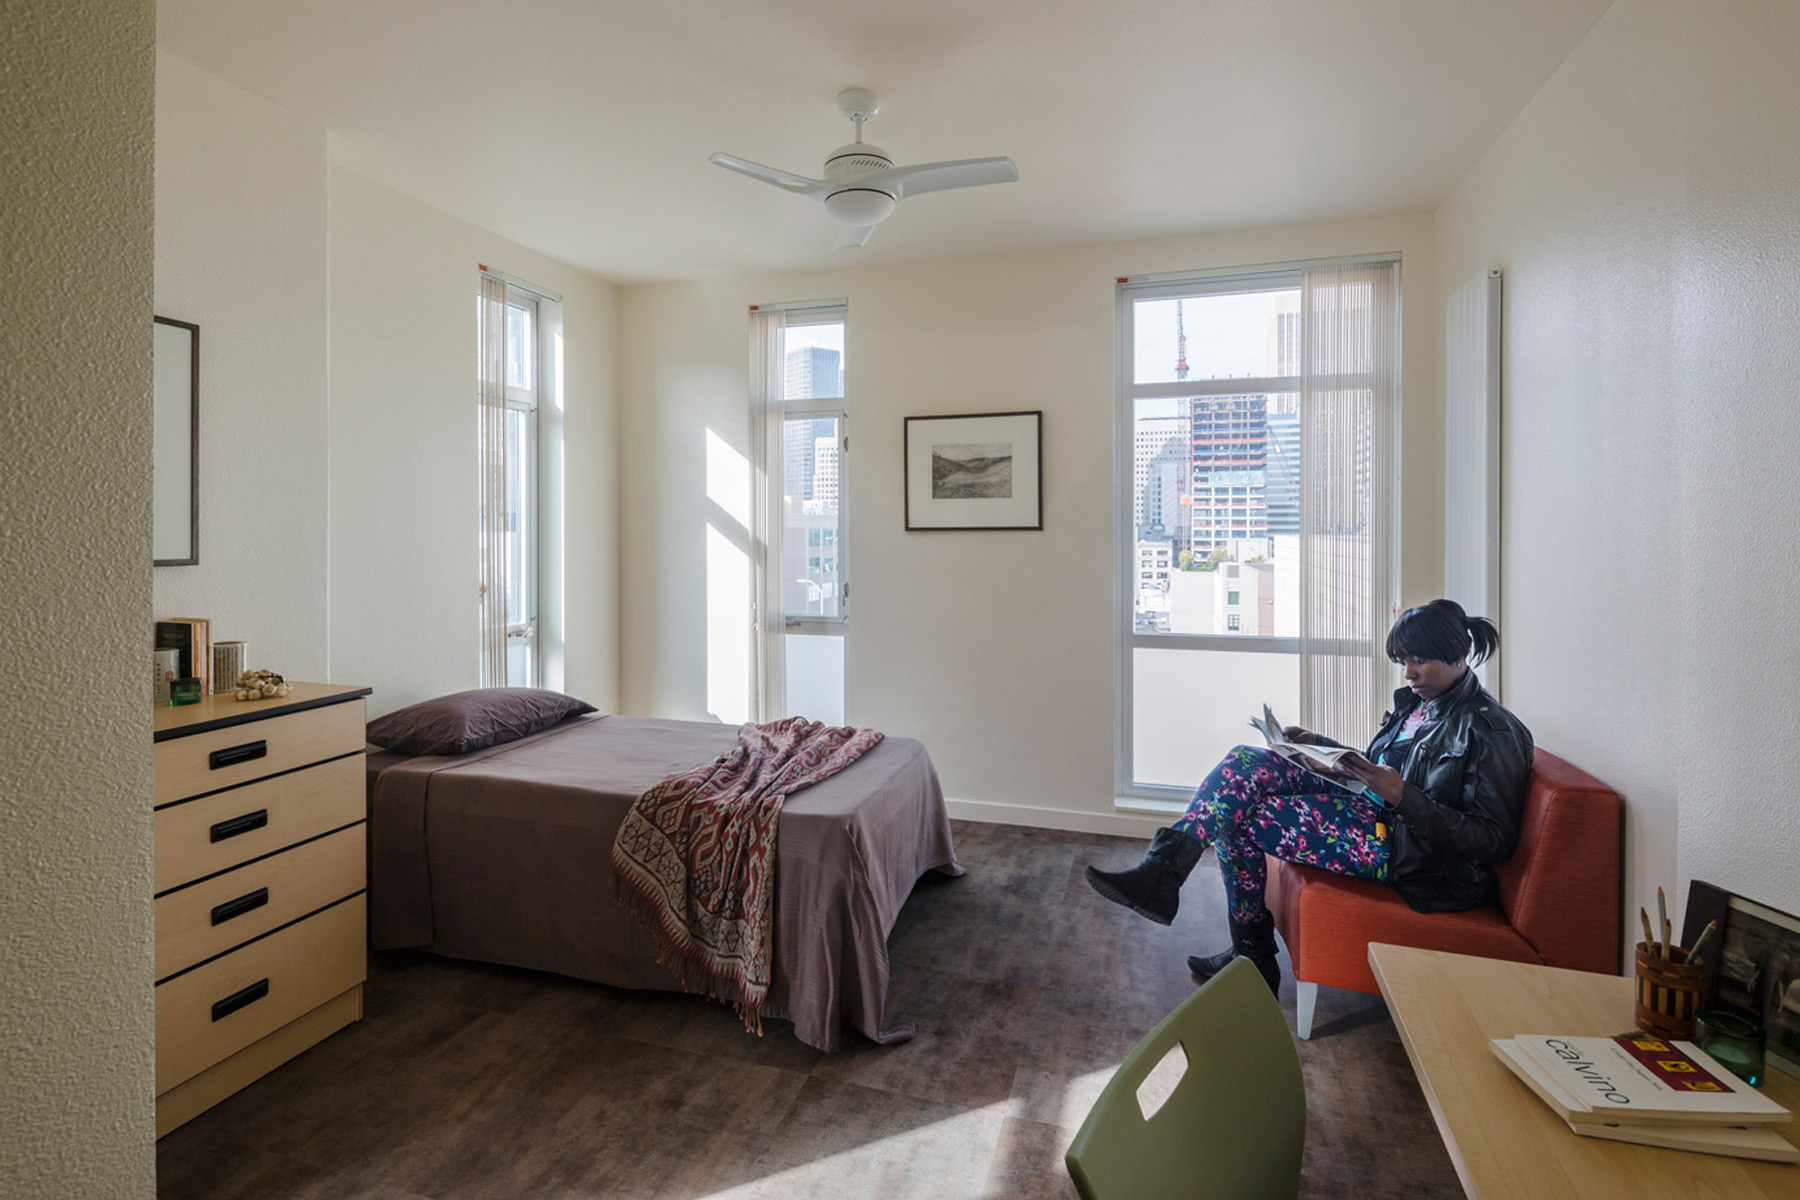 Rene Cazenave Apartments in San Francisco is a model of sustainability for affordable housing, providing permanent residences for formerly homeless individuals in the Transbay Redevelopment Area.